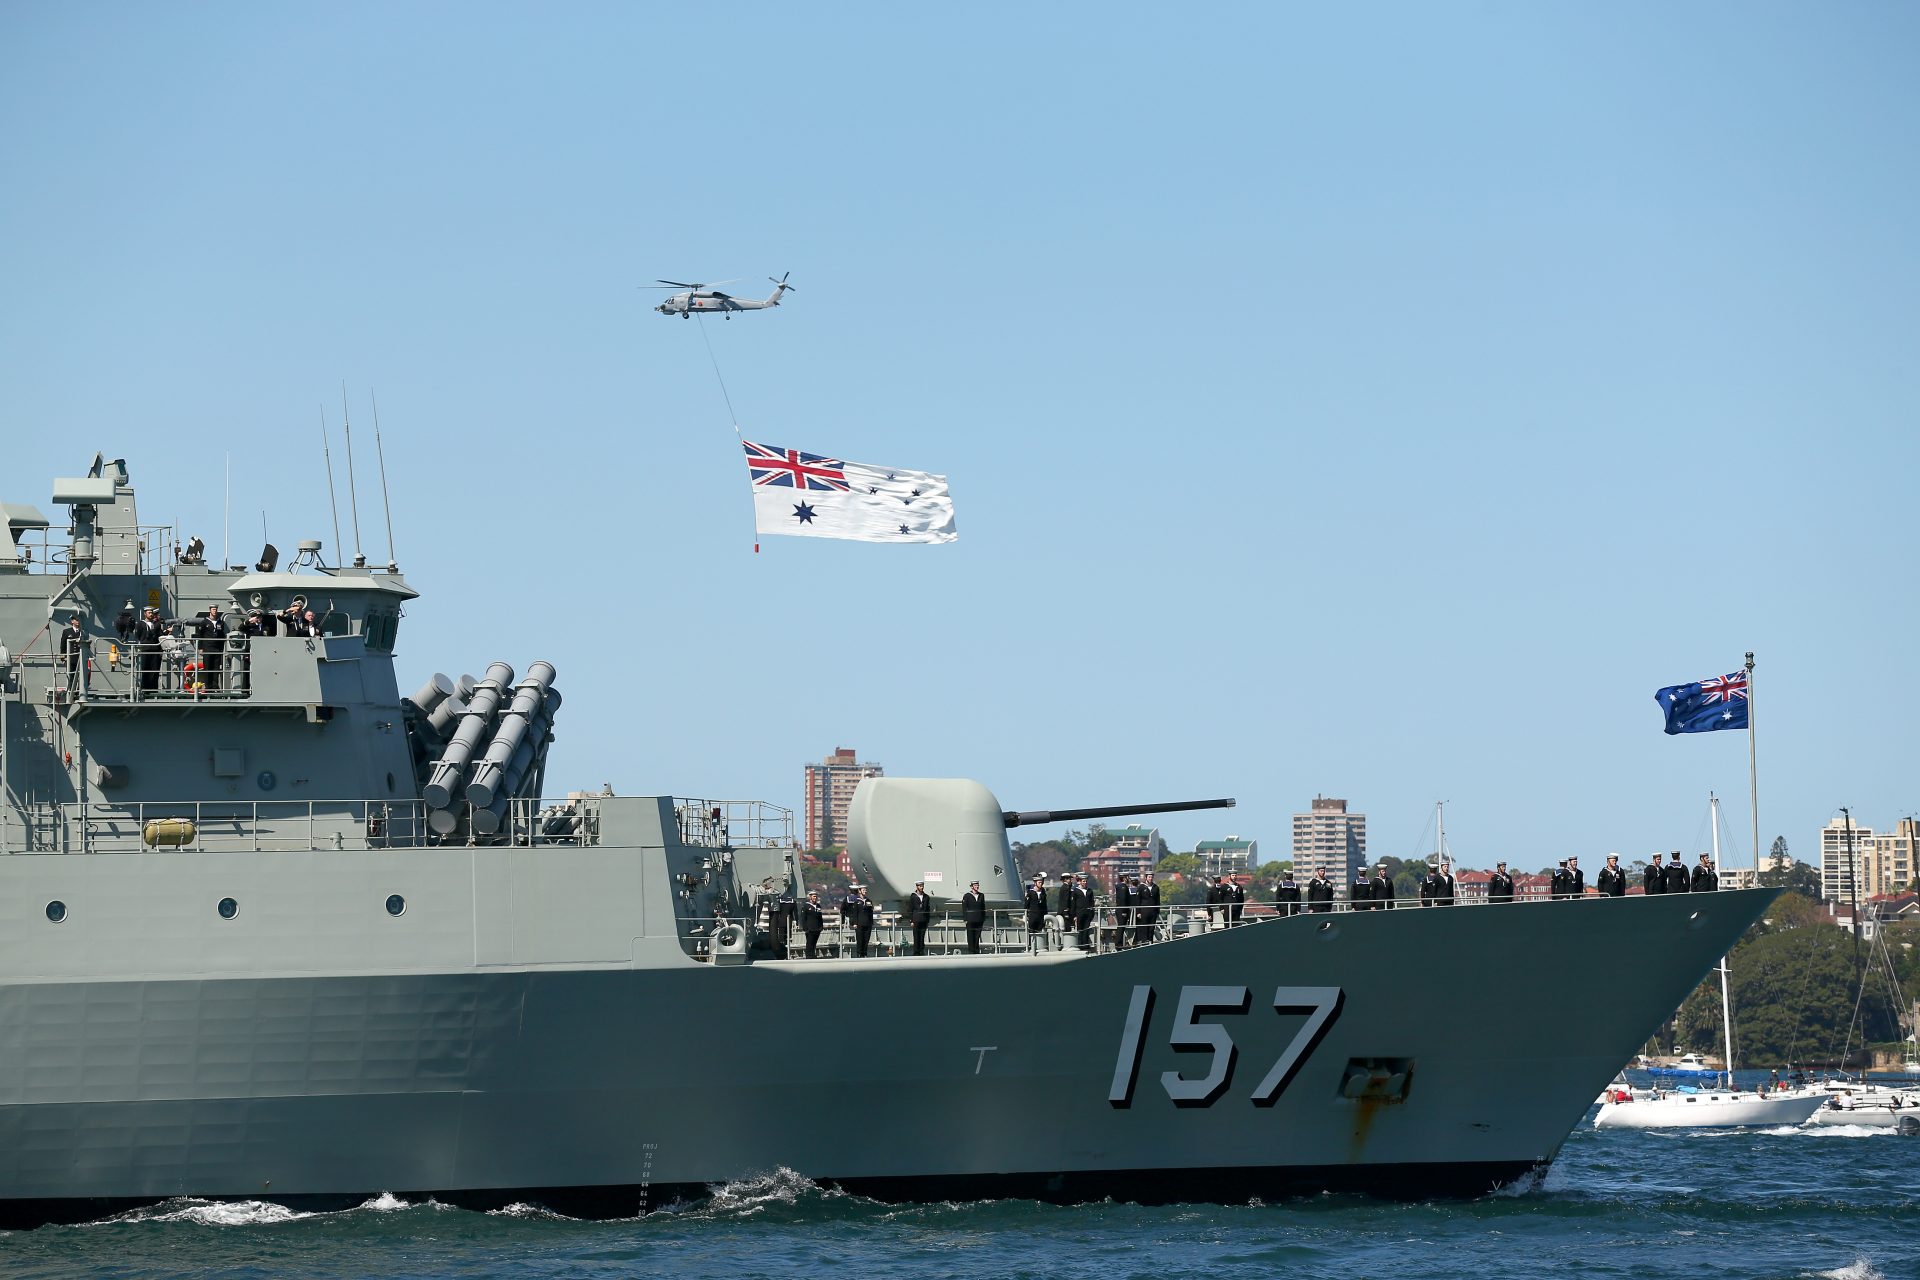 Australia will spend $35 billion on its navy as tensions with China increase